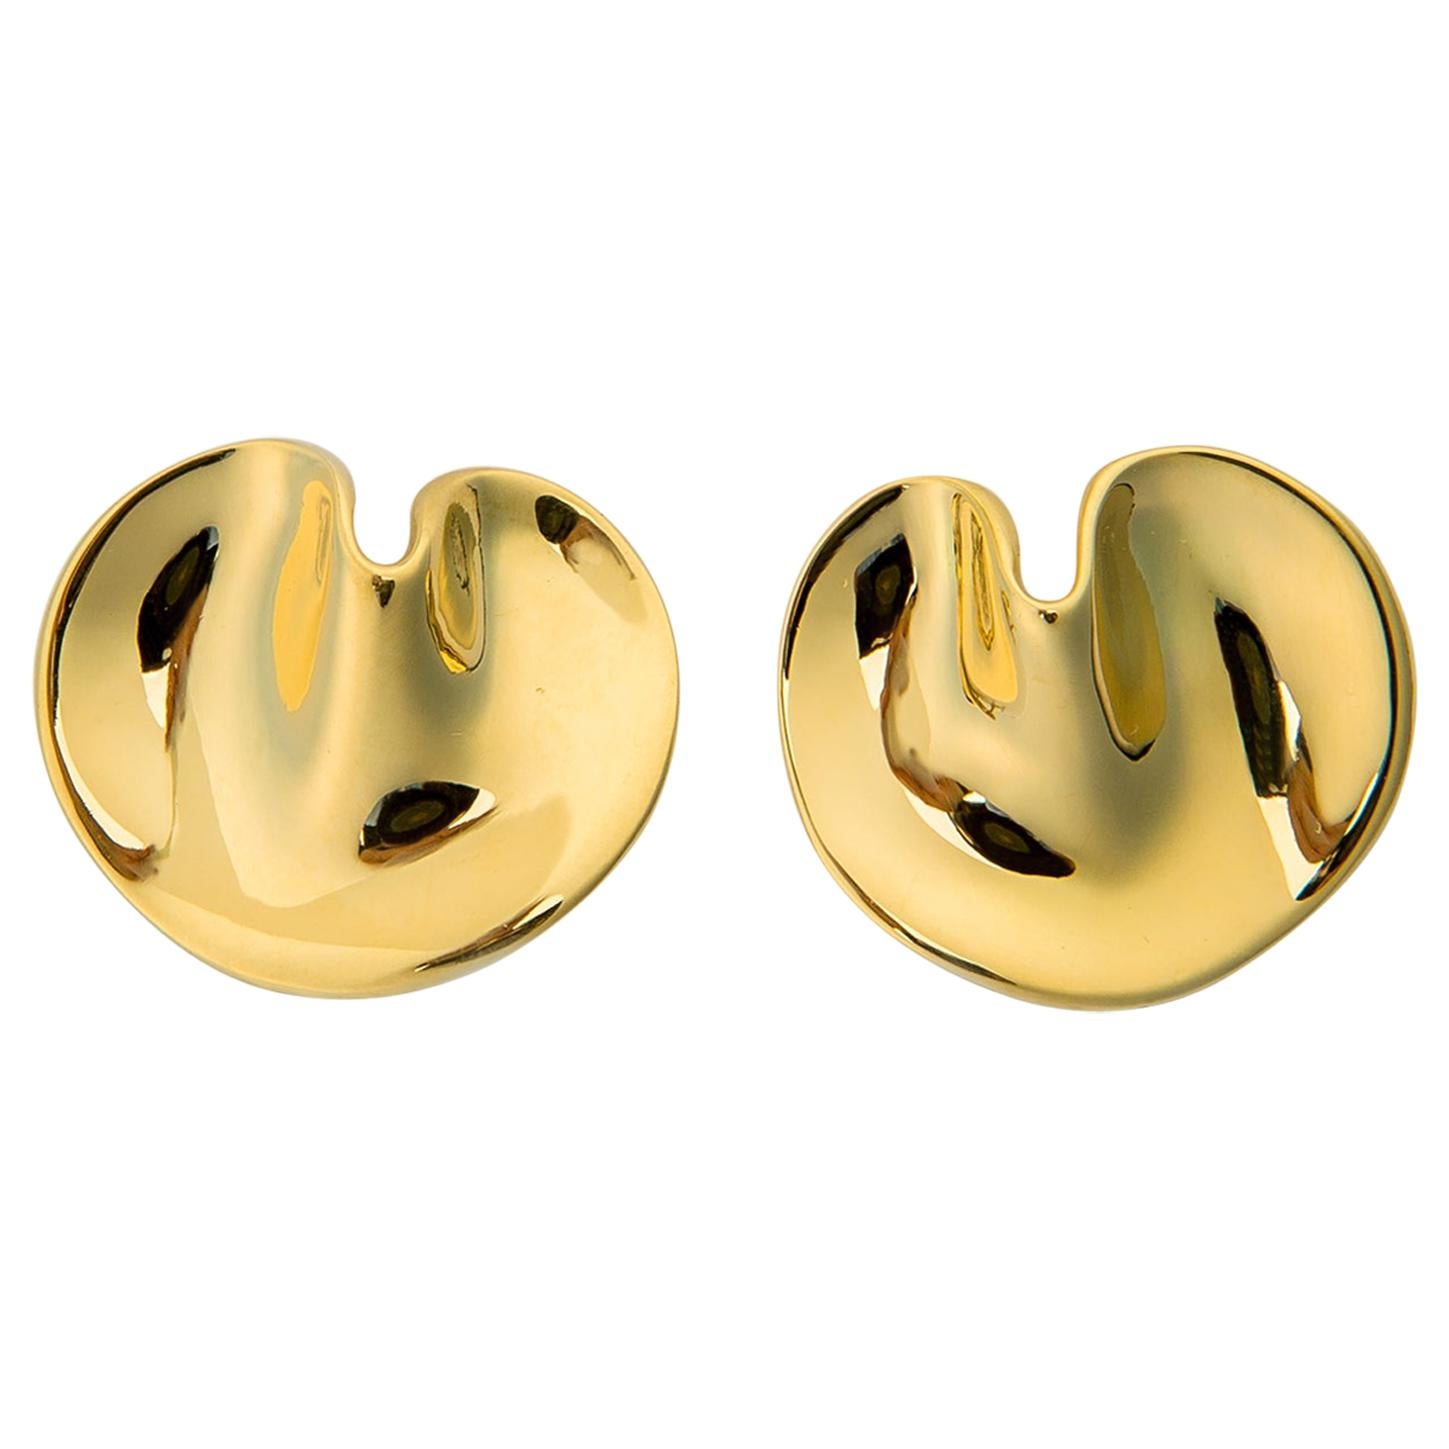 Tiffany & Co. Gold Lily Pad Earrings